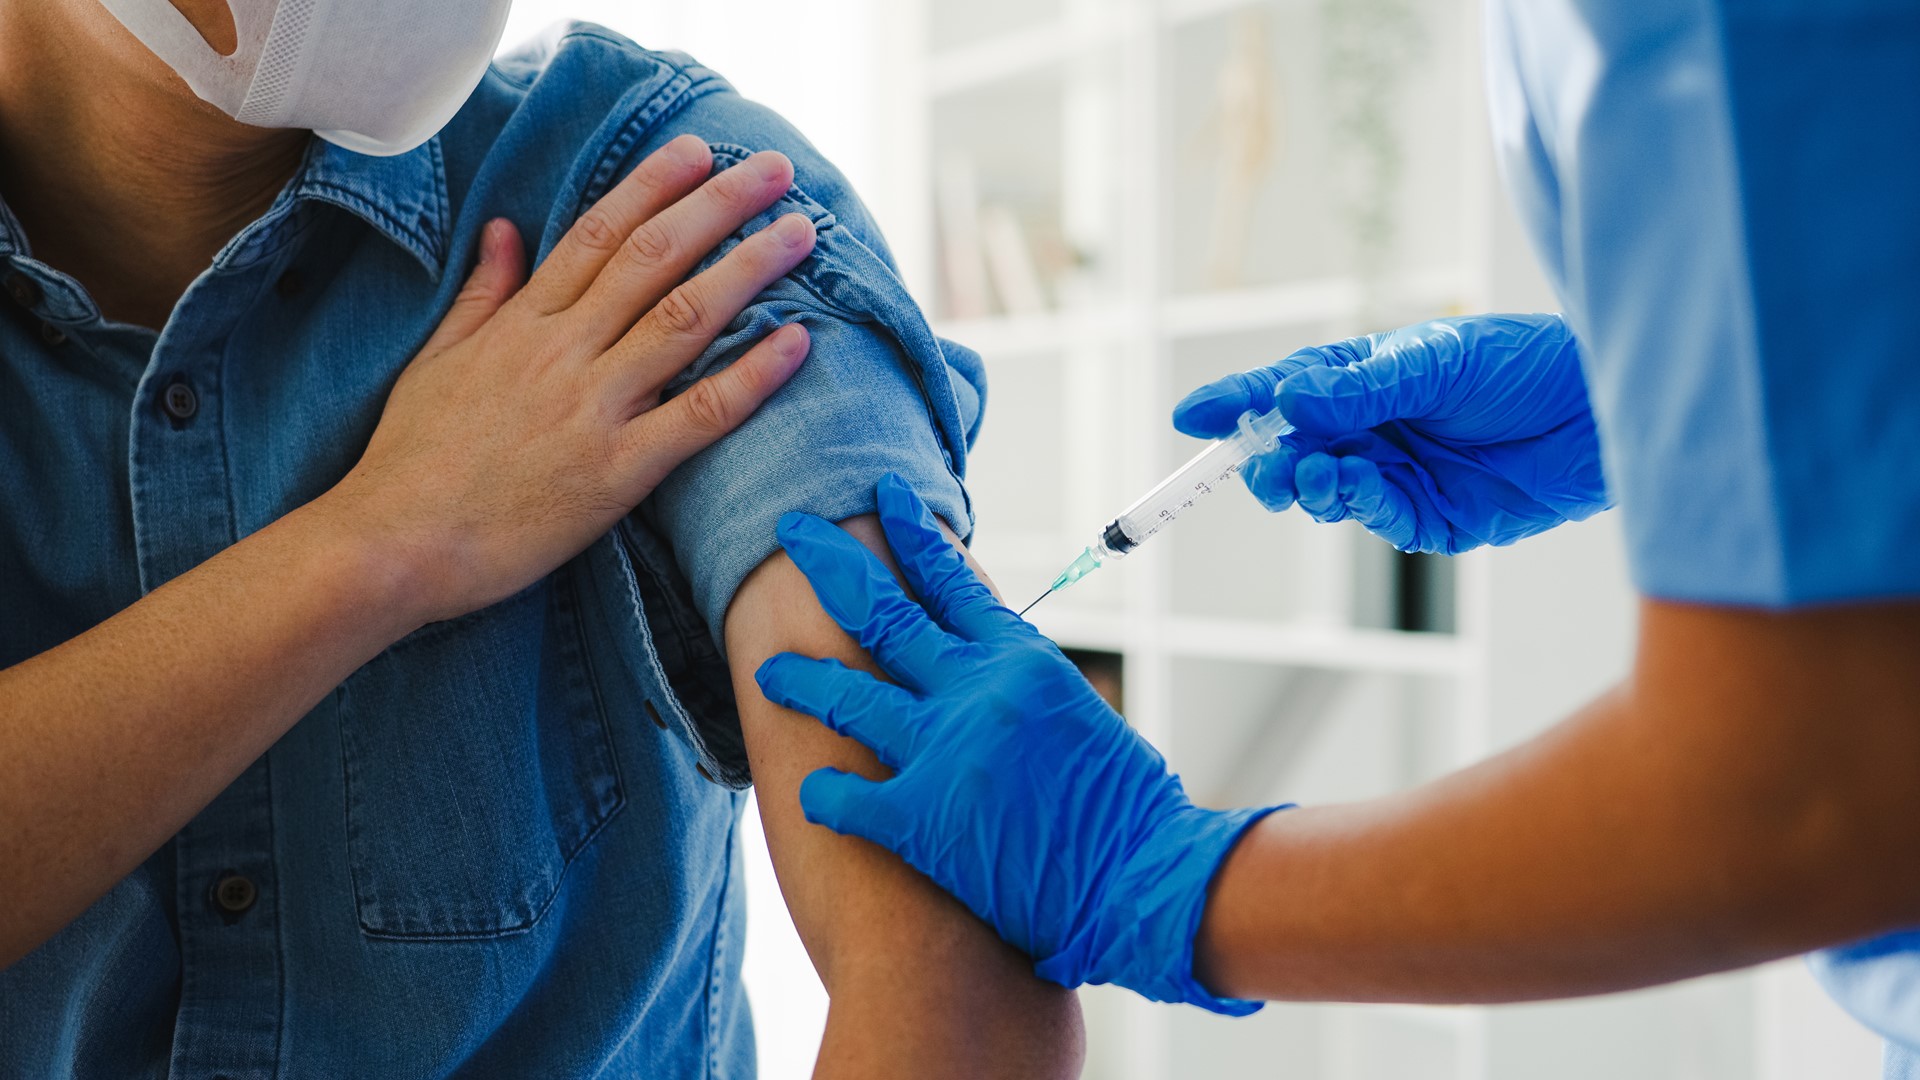 As major corporations move to require employees to be vaccinated, people are wondering how many other businesses and cities will follow suit.